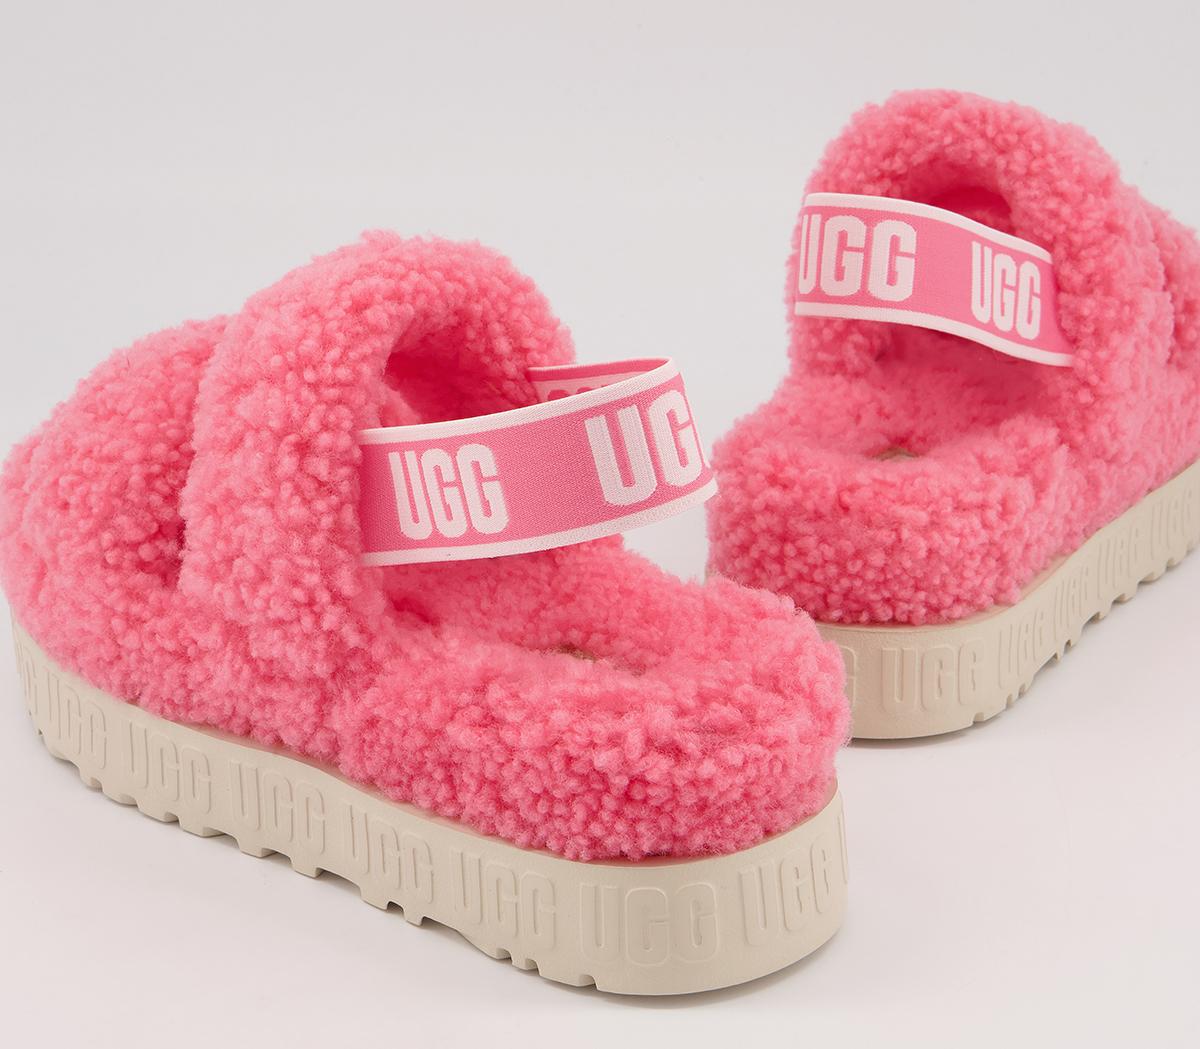 UGG Oh Flufitta Slippers Pink Rose - Flat Shoes for Women